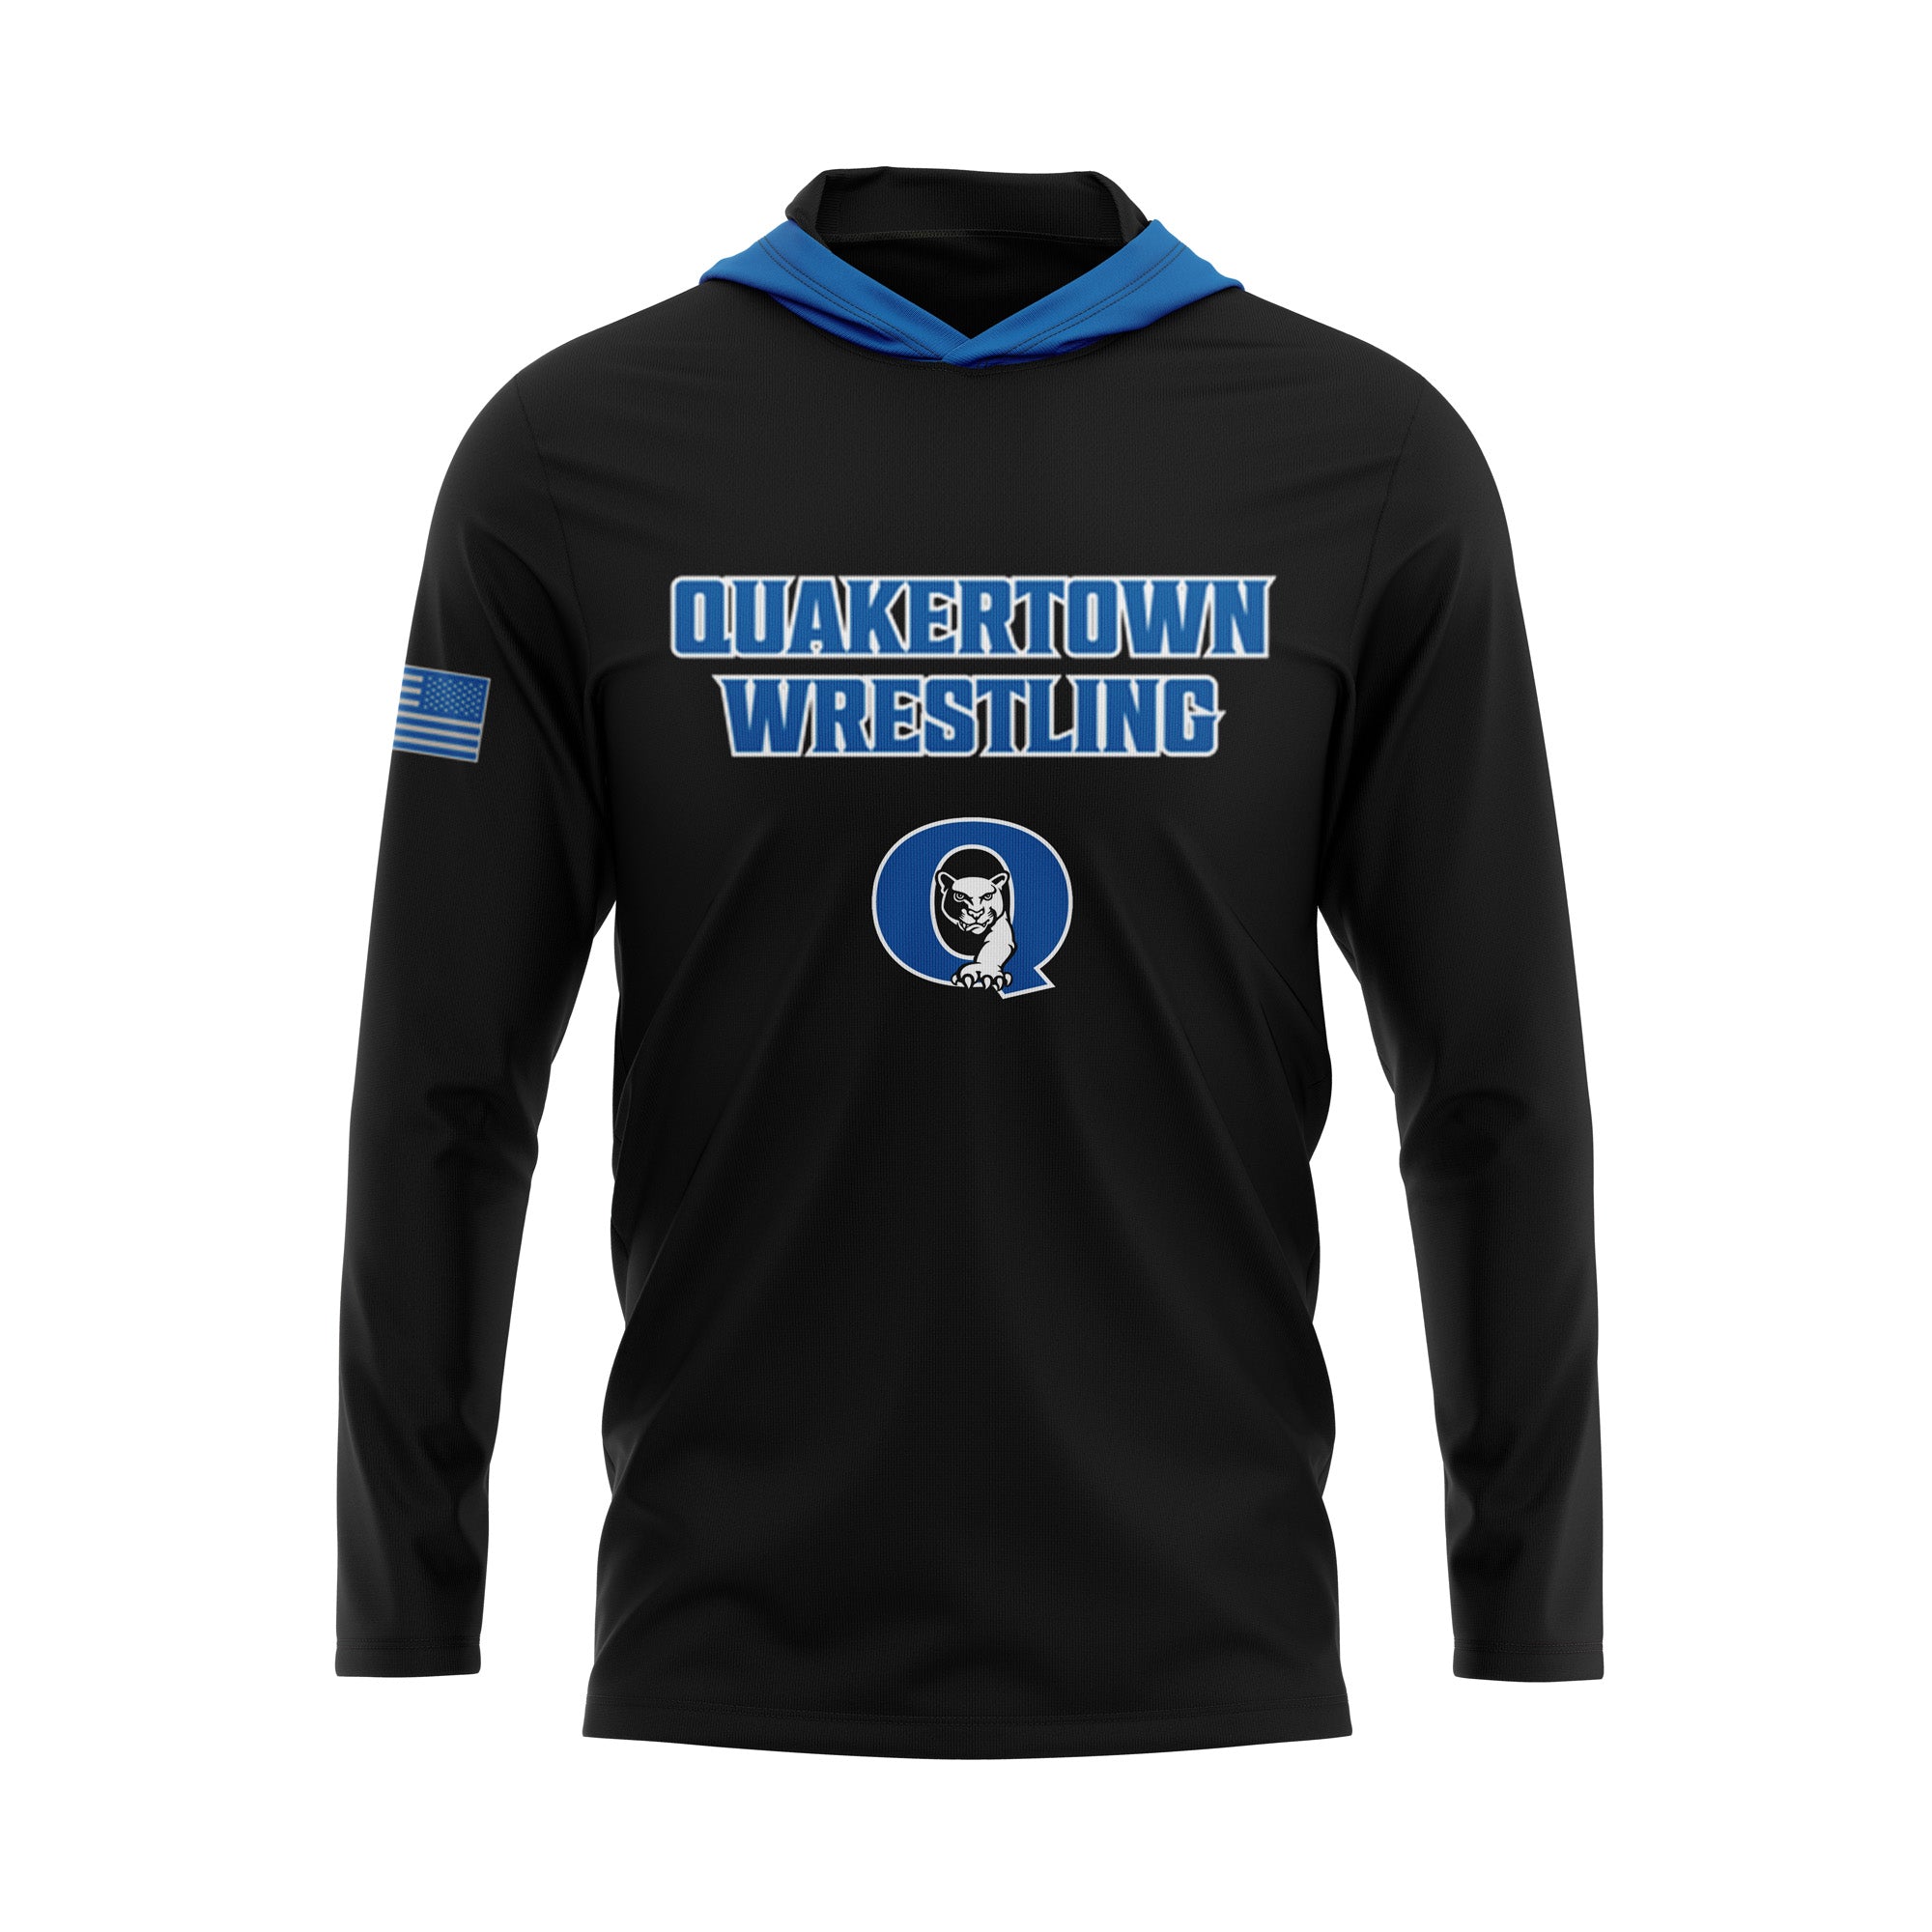 QUAKERTOWN WRESTLING Sublimated Lightweight Long Sleeve Hoodie